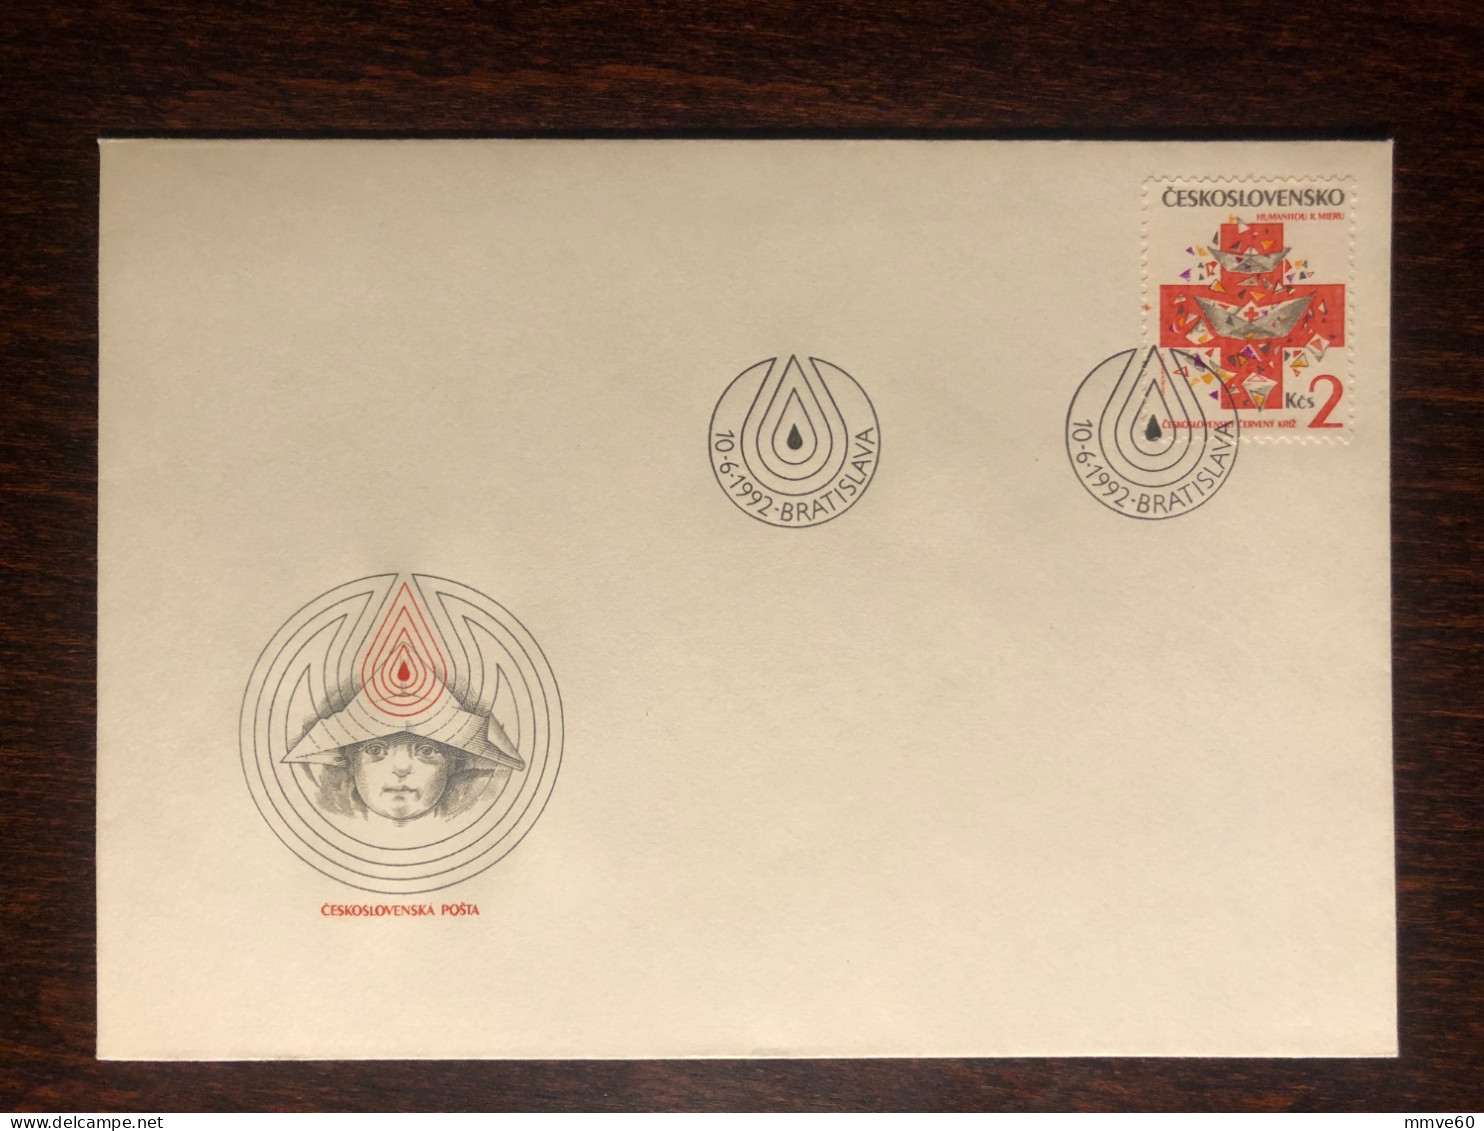 CZECHOSLOVAKIA FDC COVER 1992 YEAR RED CROSS HEALTH MEDICINE STAMPS - FDC